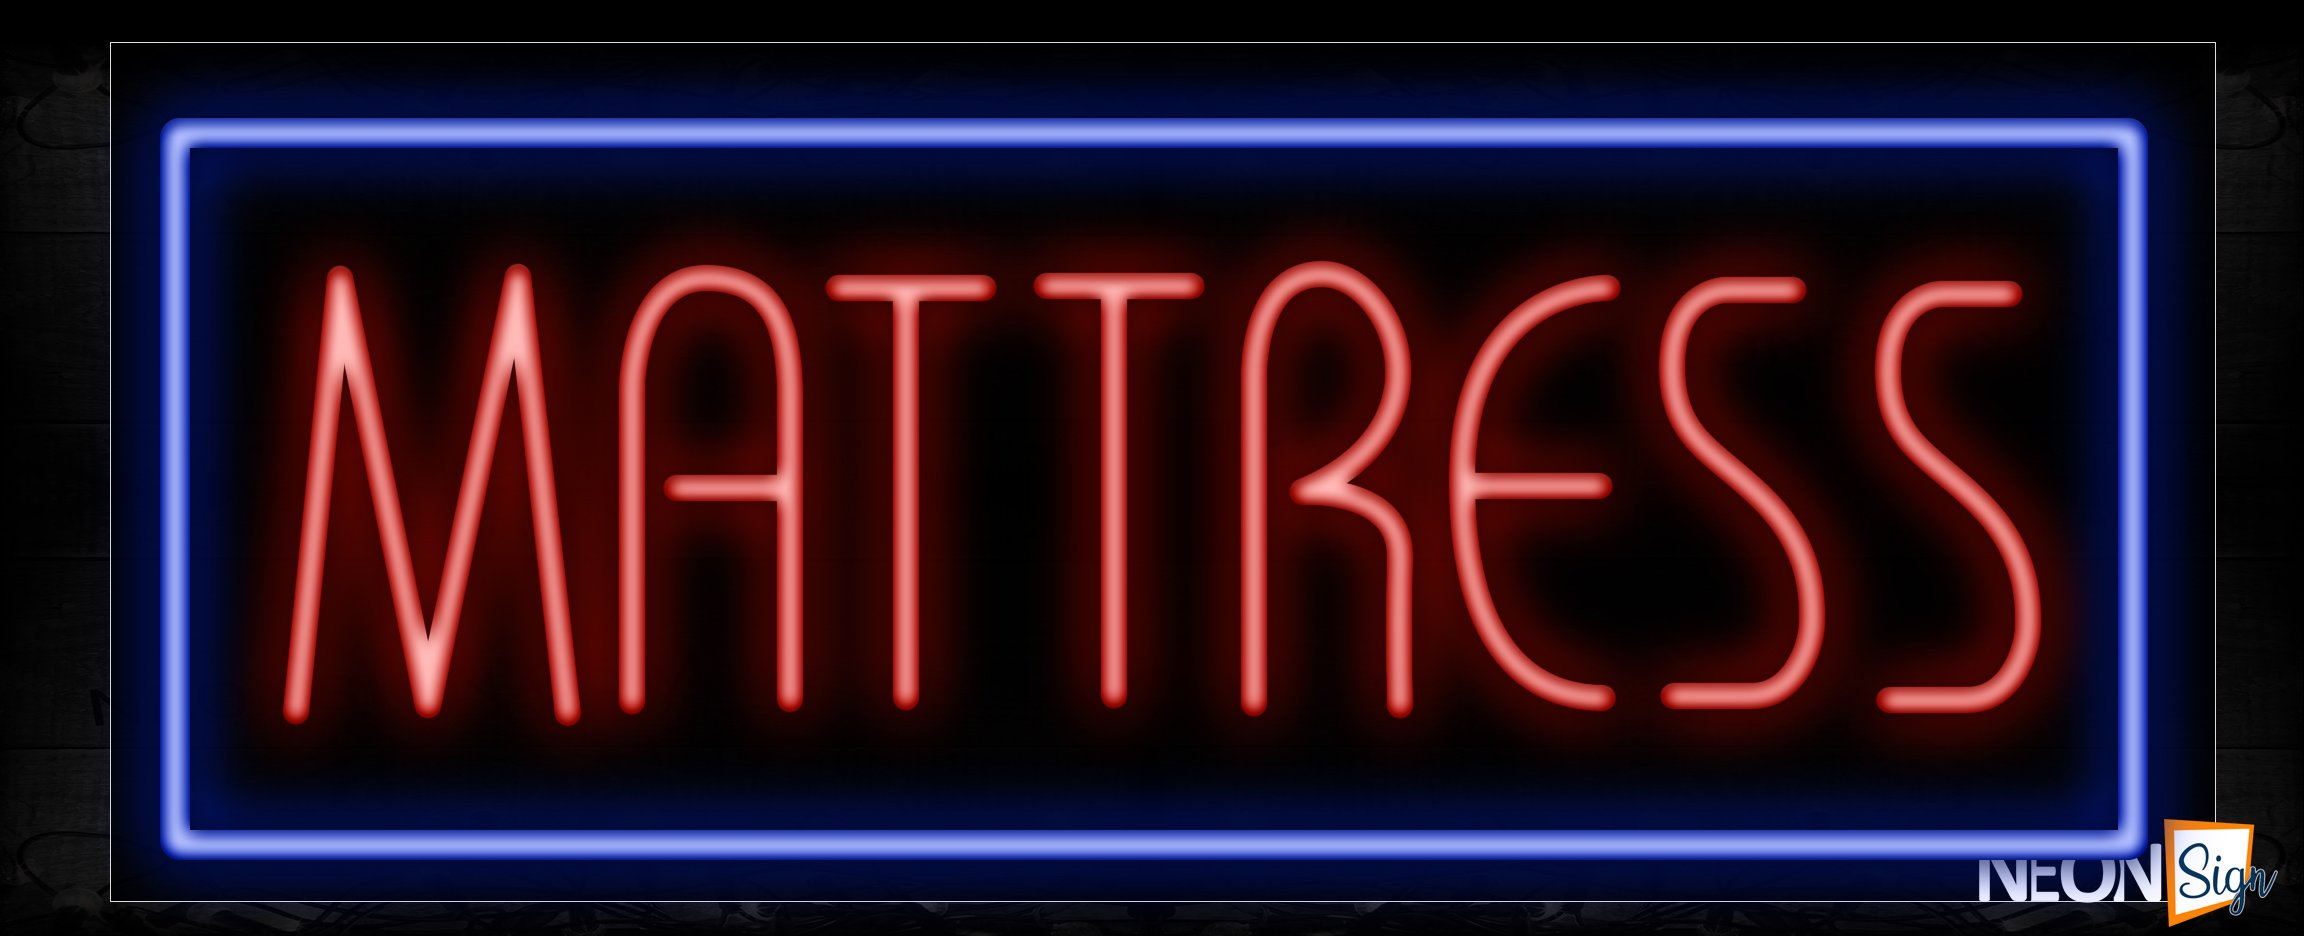 Image of 10260 Mattress in red with blue border Neon Sign_13x32 Black Backing